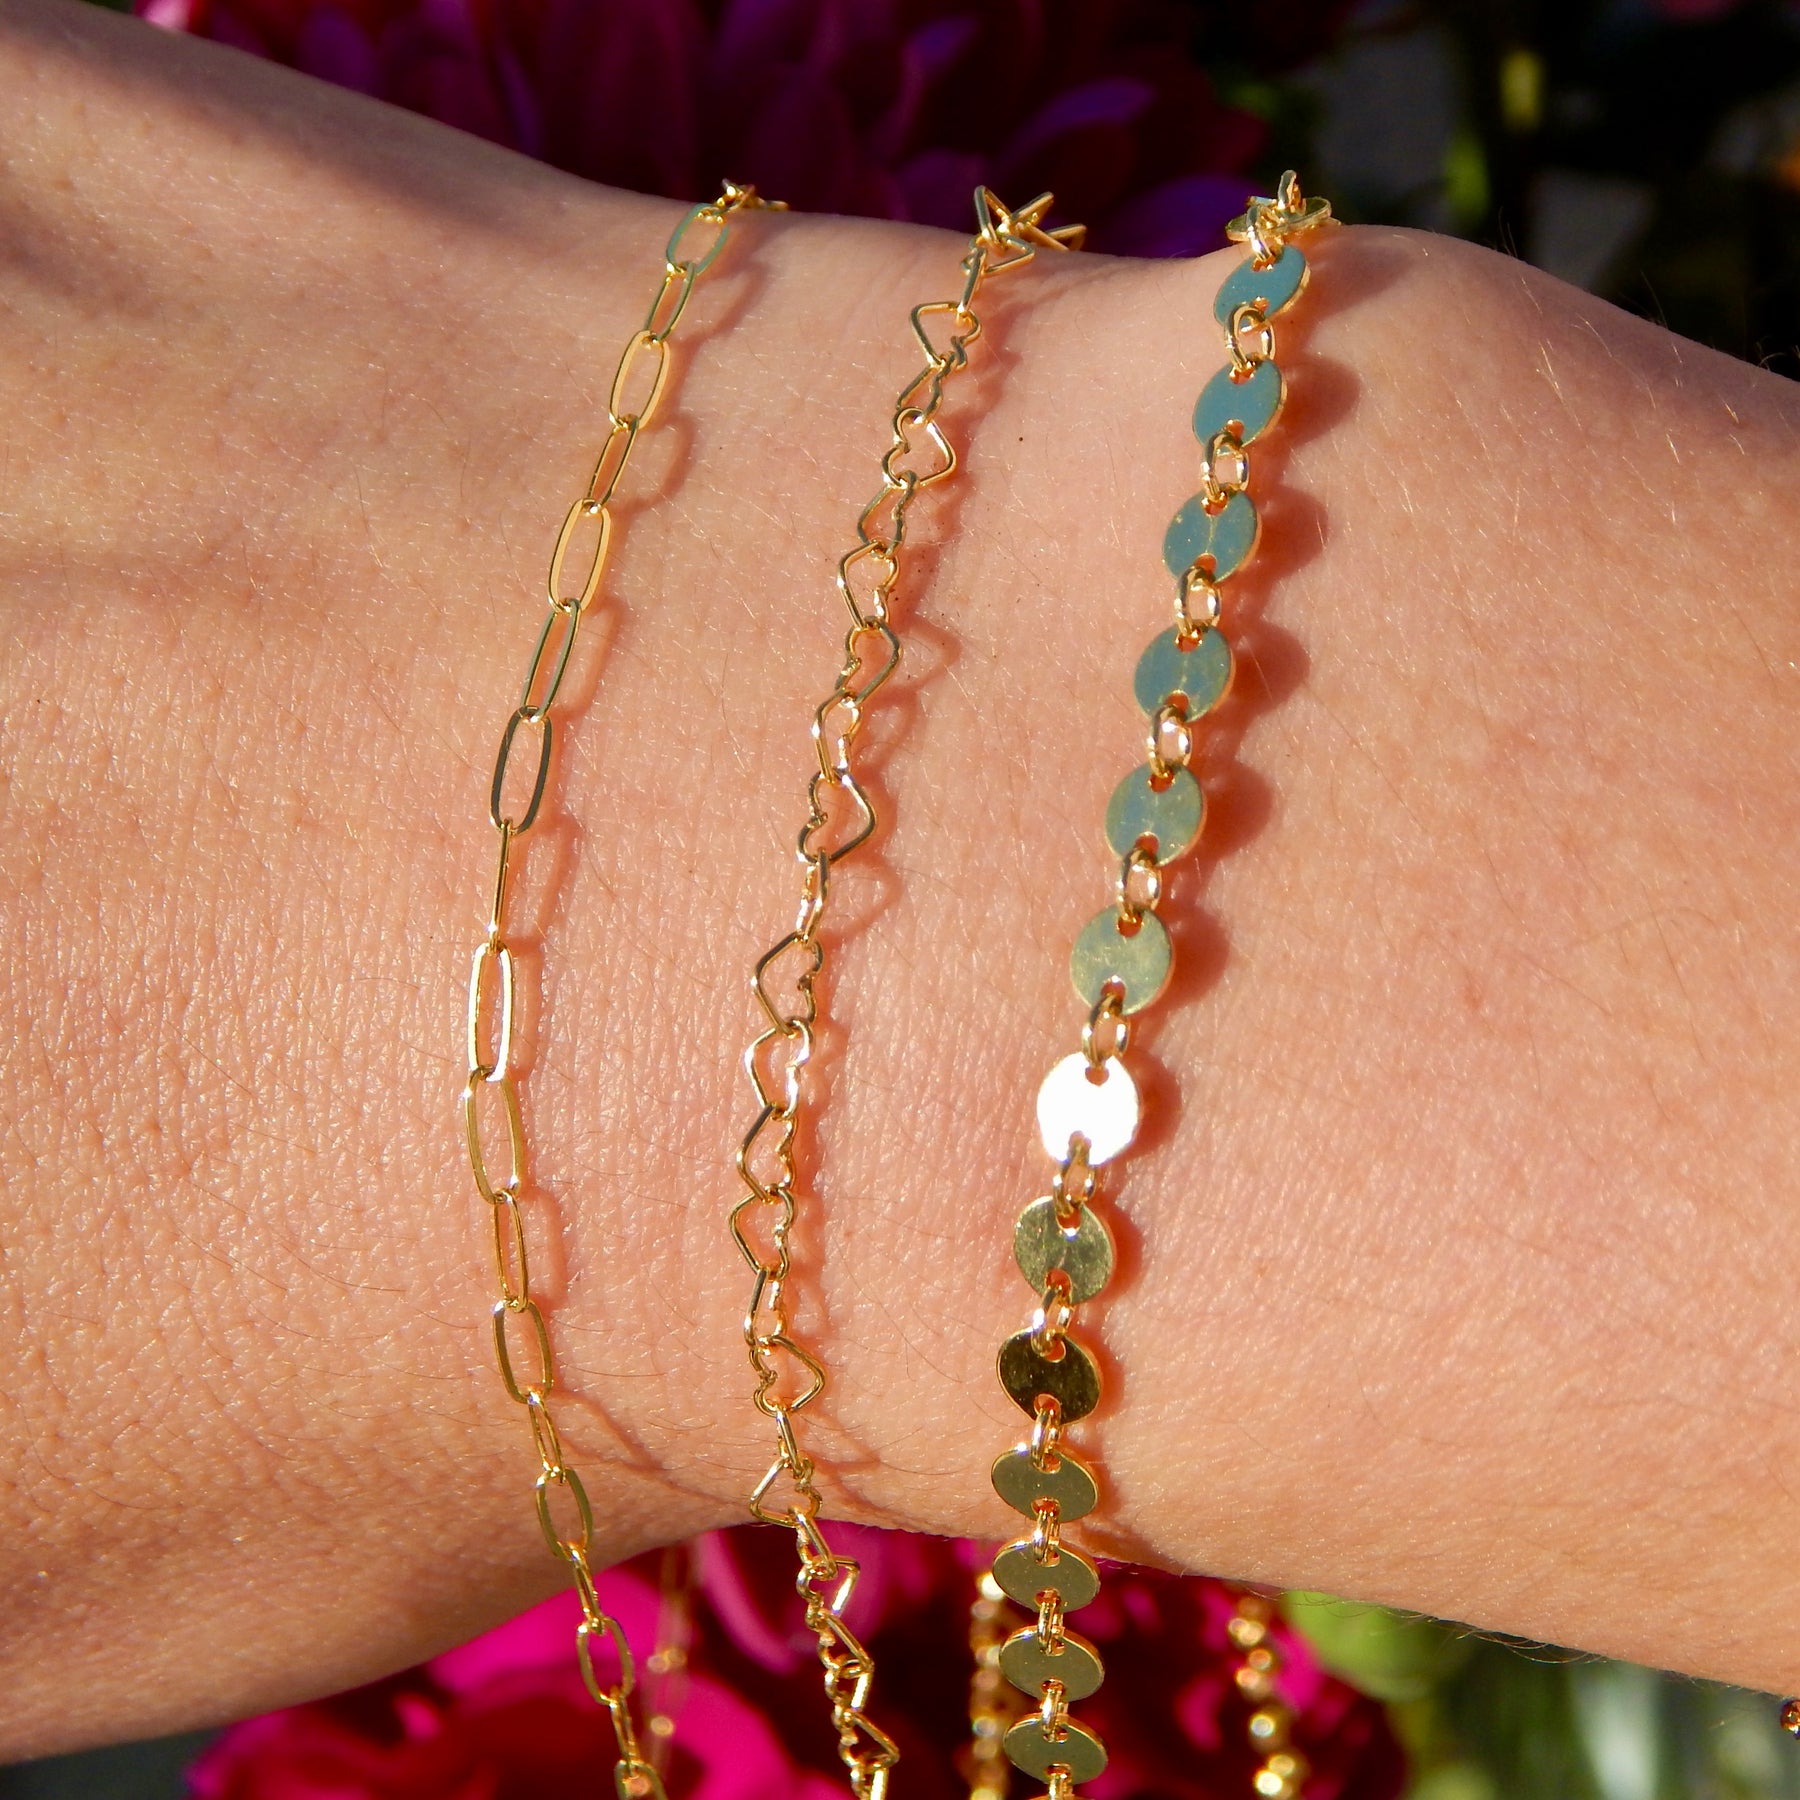 Permanent Gold Bracelets in Fort Collins: Book Appointment Permanent Jewelry